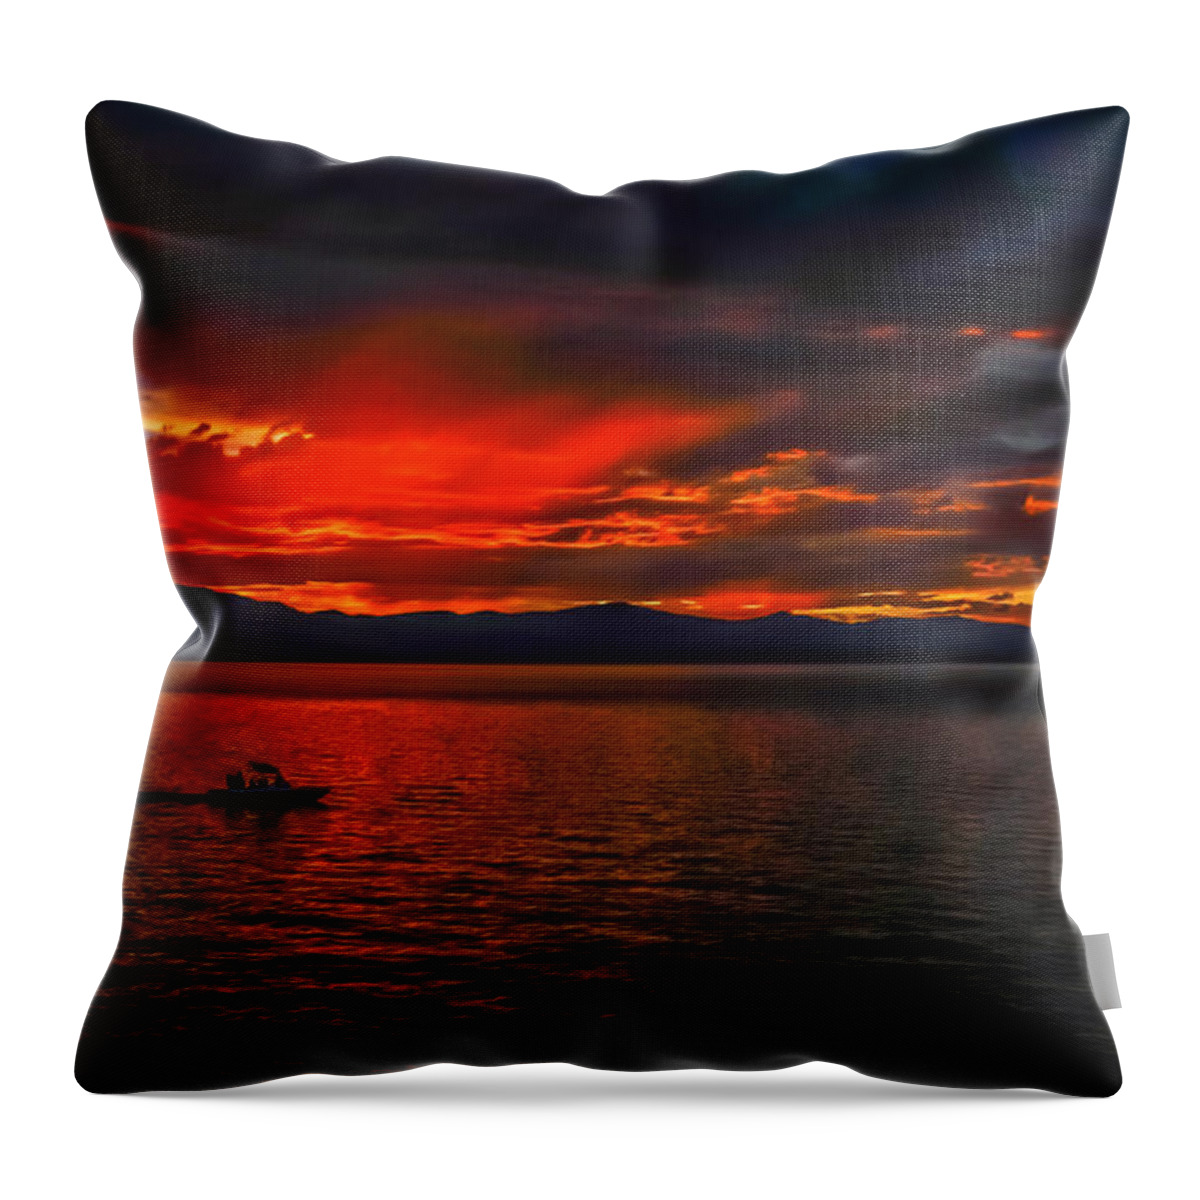 Lake Tahoe Sunset Throw Pillow featuring the photograph Tahoe Boat Ride by Mitch Shindelbower